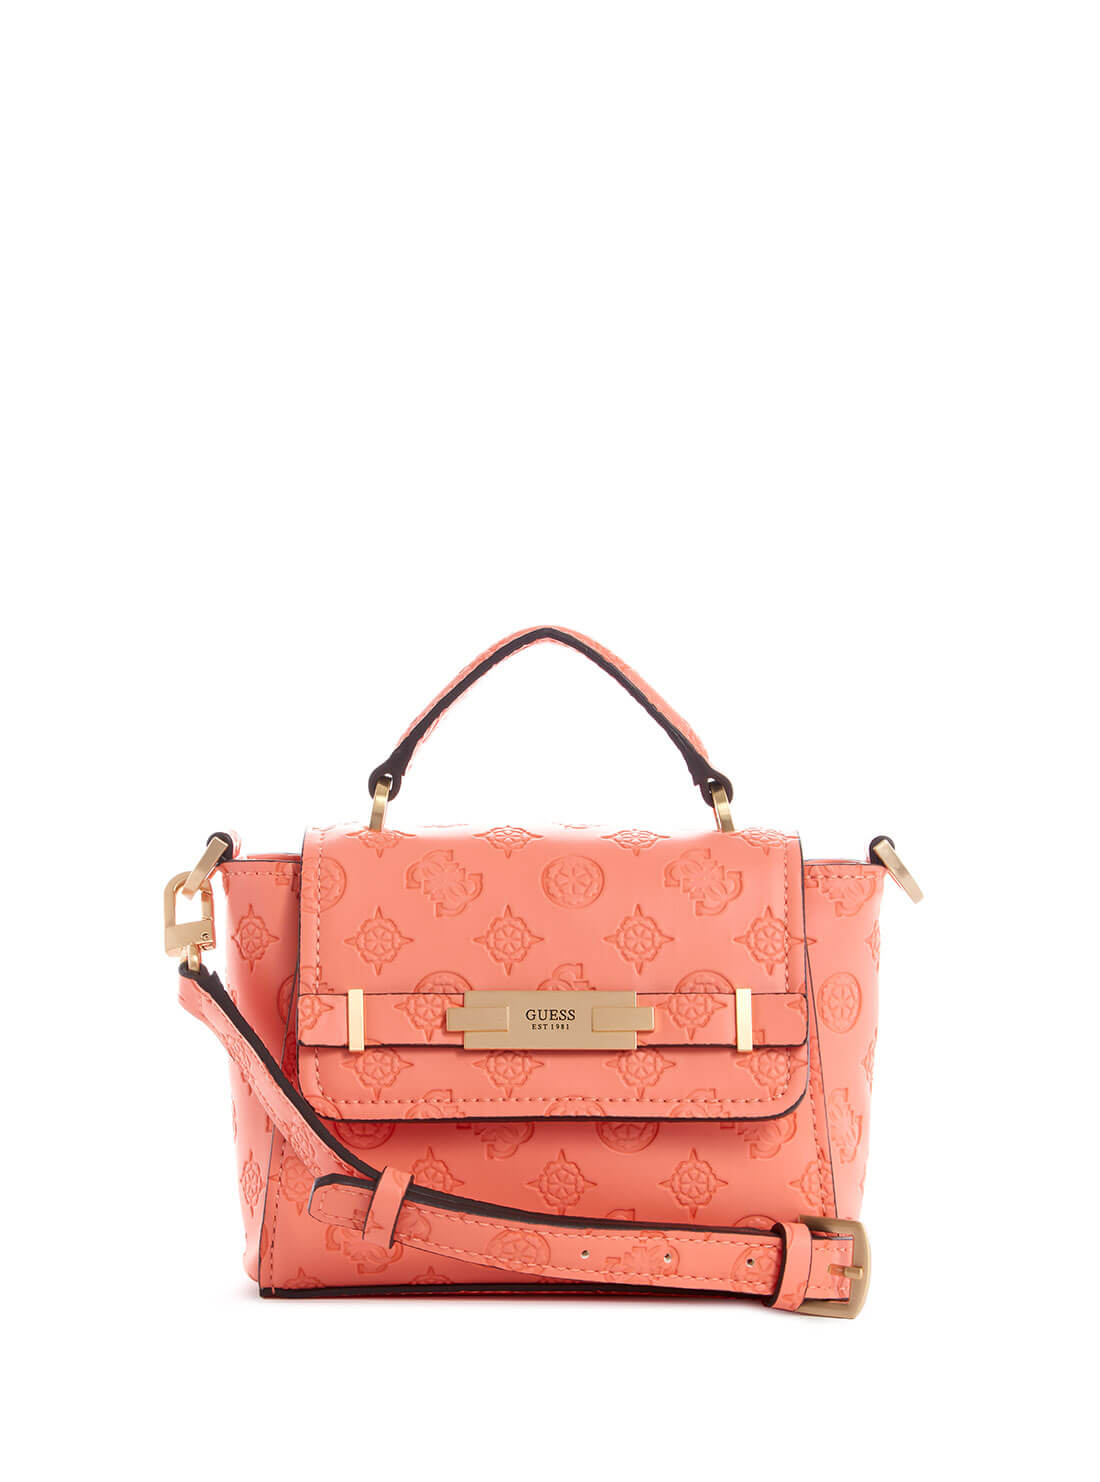 GUESS Coral Bea Mini Top Handle Bag front view